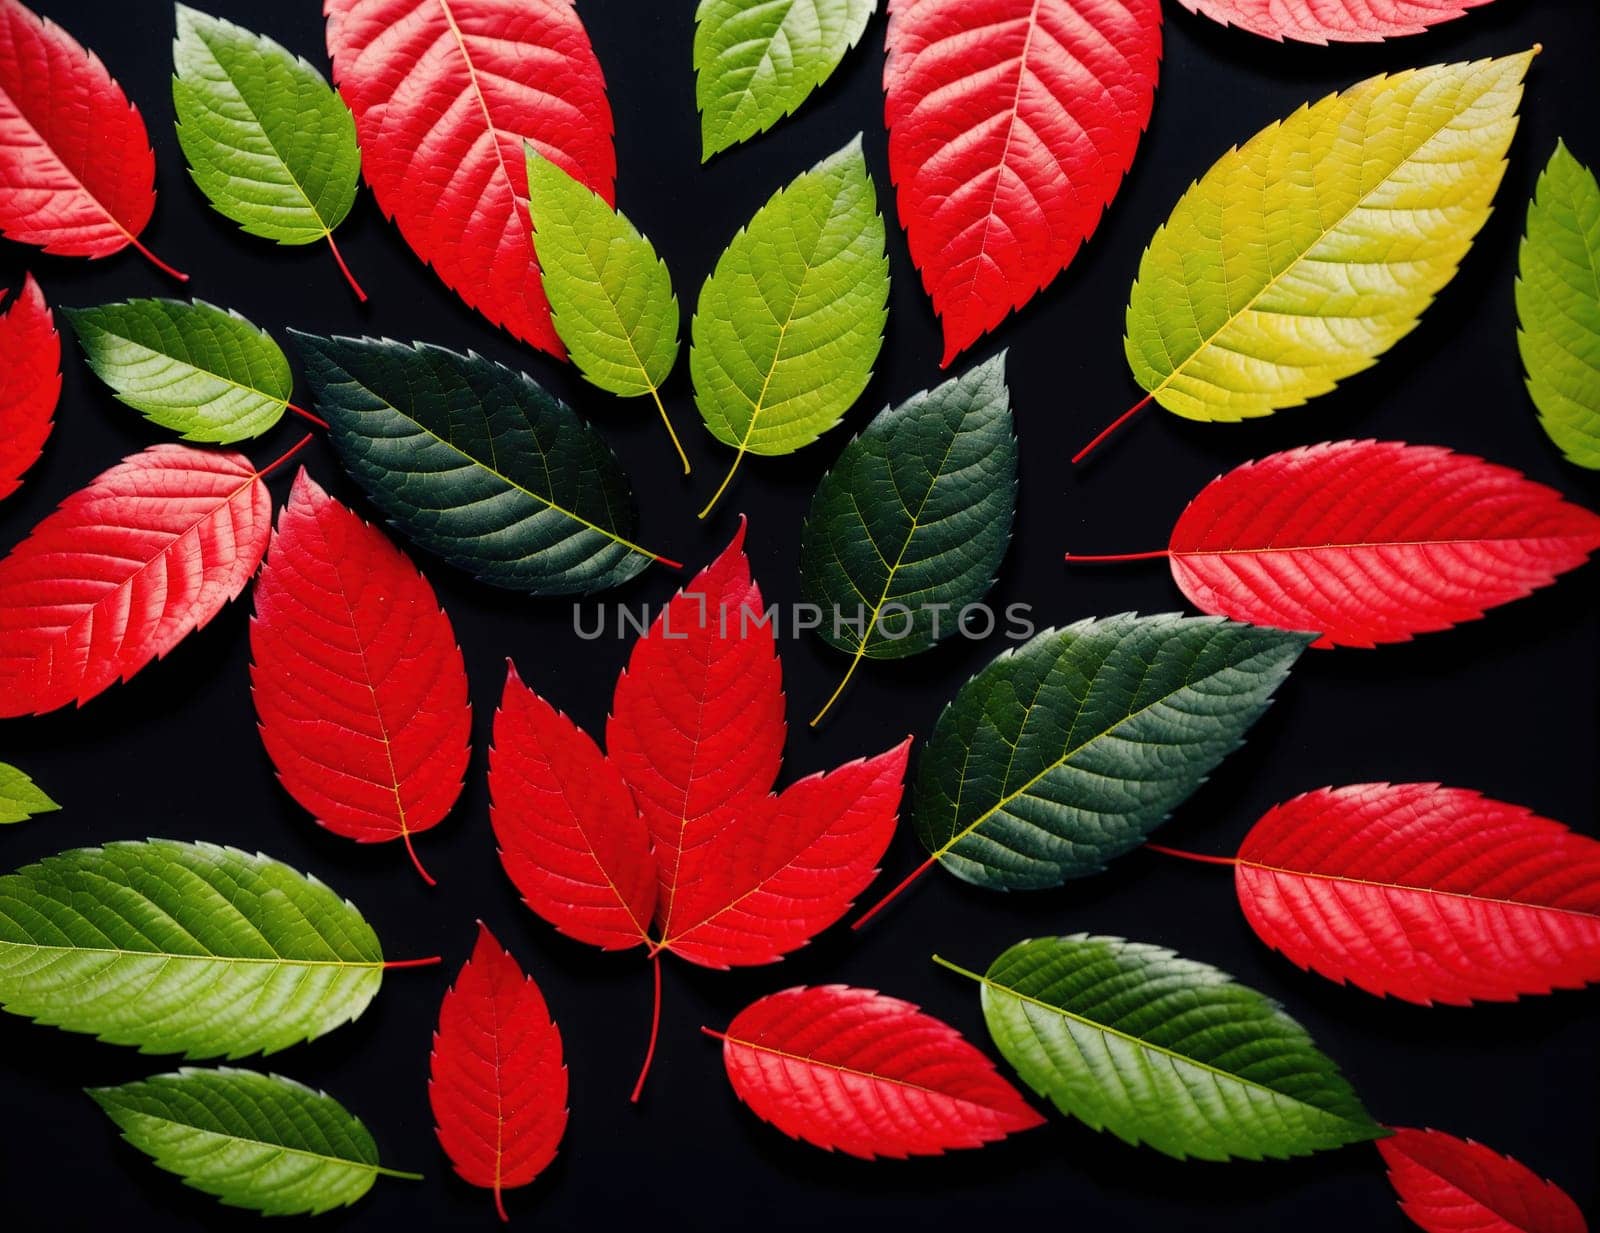 A group of leaves in various shades of red, orange, yellow, and green. by creart